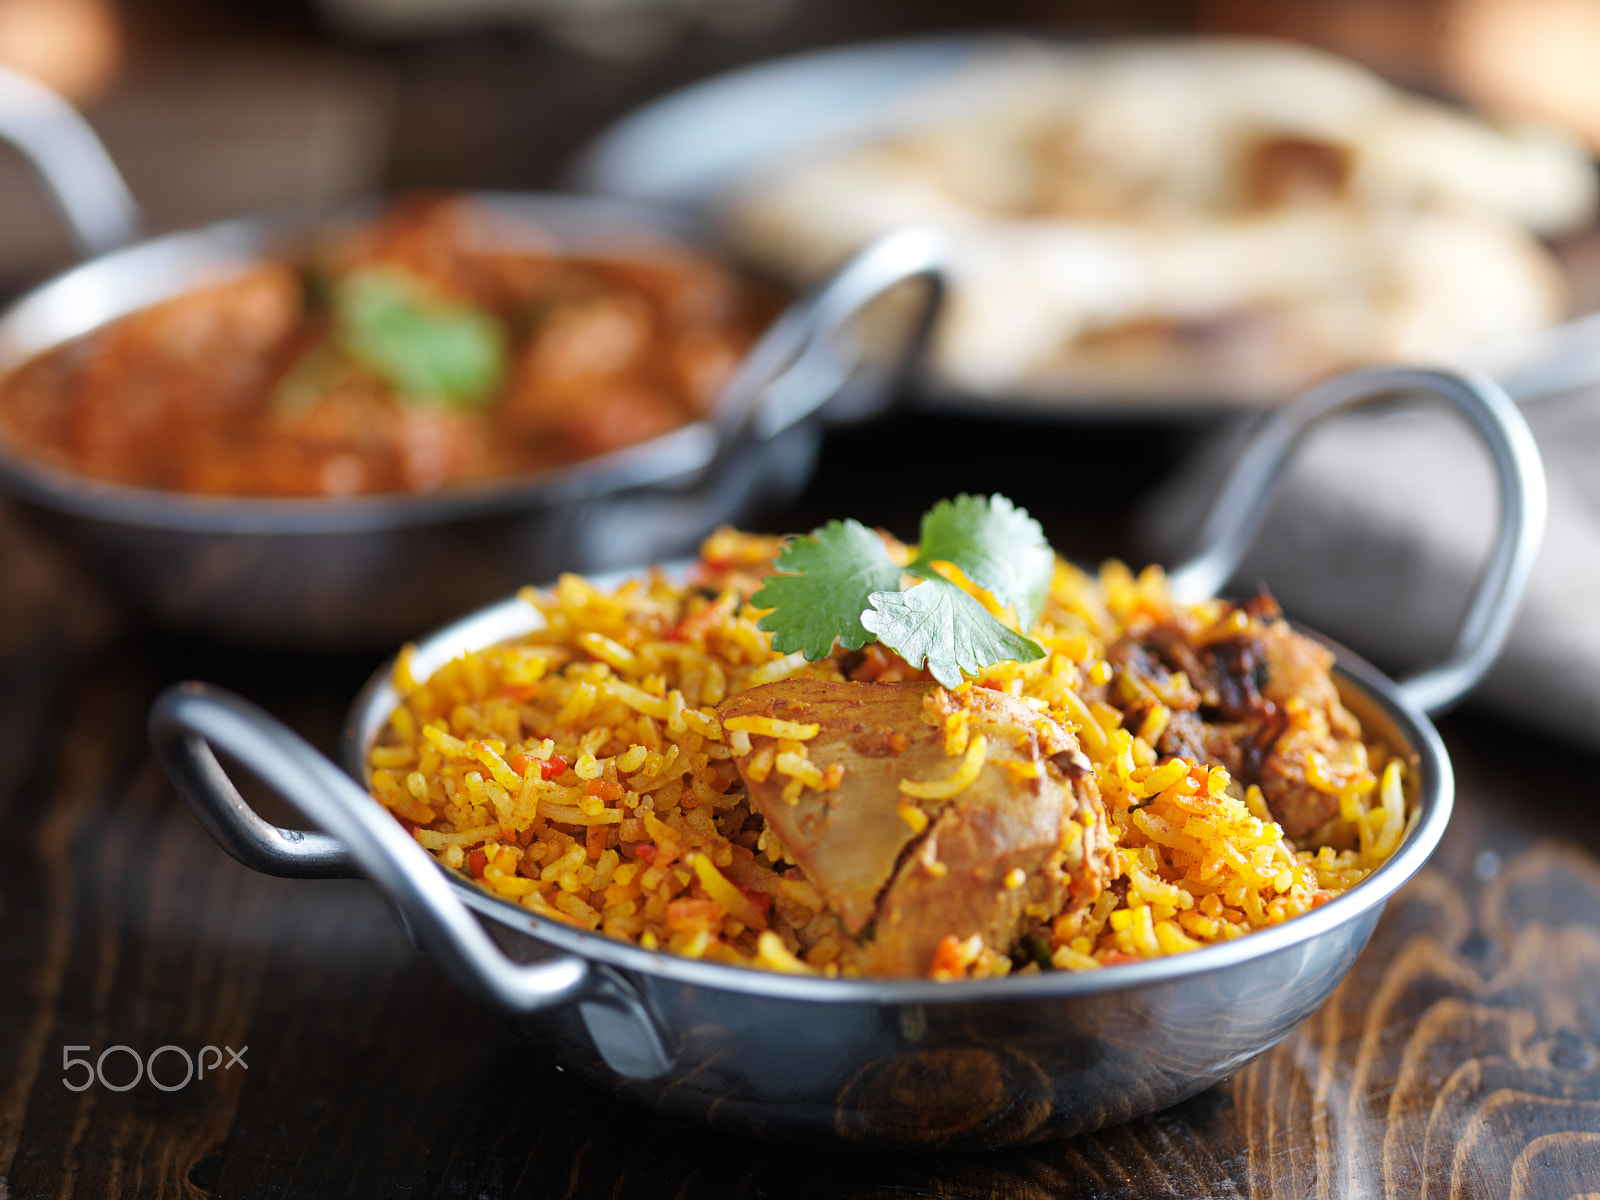 HC 120 sample photo. Balti dish with indian chicken biryani and curry in the background photography